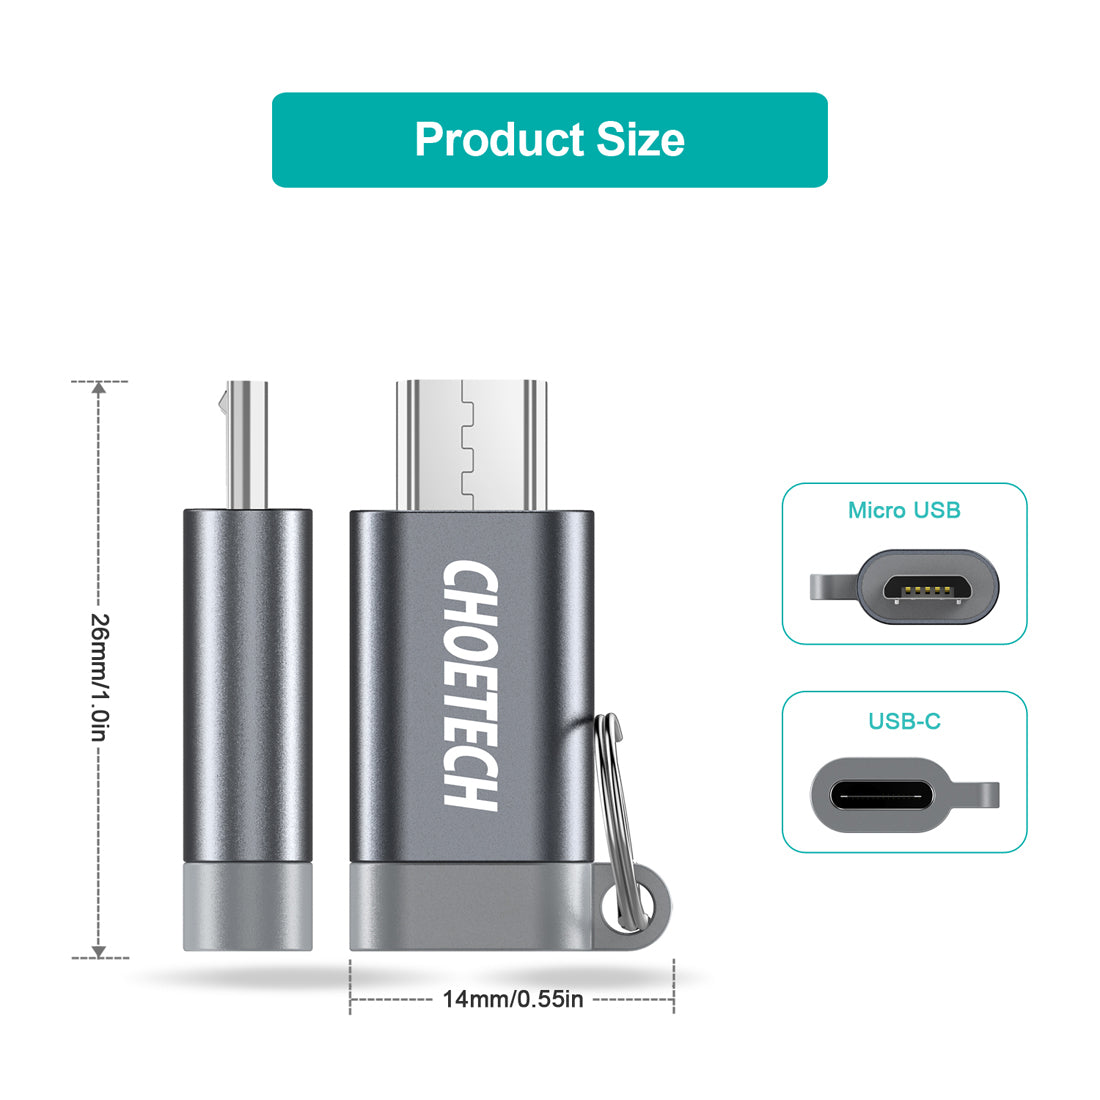 MIX00084 Choetech Micro USB to USB-C Adapter 4-Pack